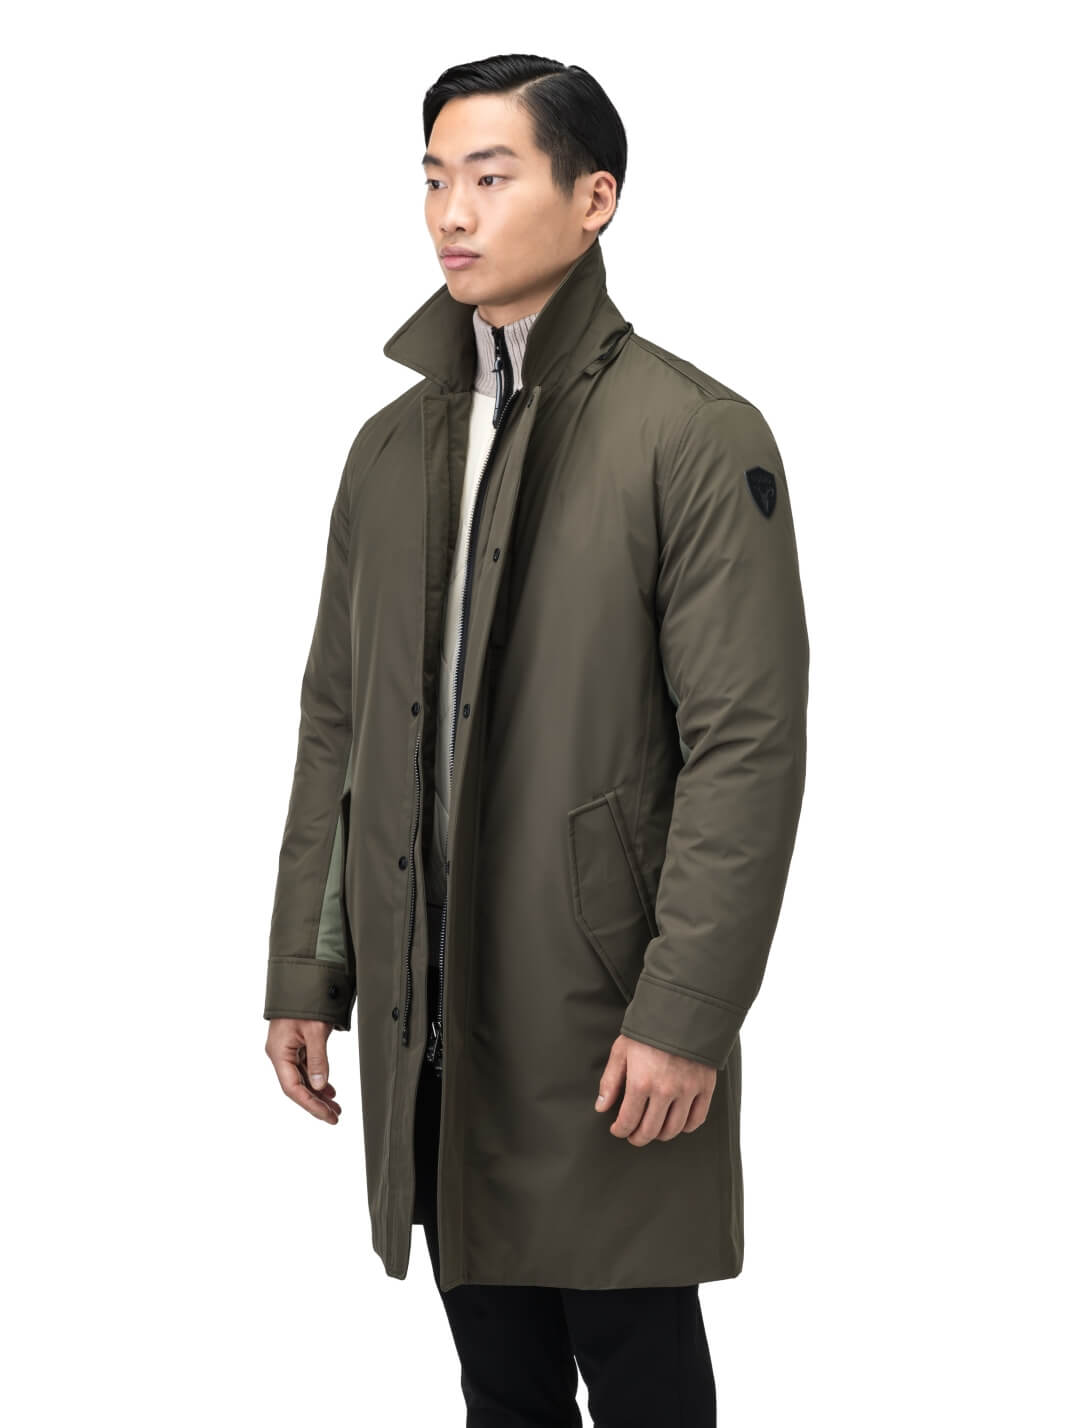 Nord Men's Tailored Trench Coat in knee length, 3-Ply Micro Denier and 4-Way Durable Stretch Weave fabrication, Premium Canadian White Duck Down insulation, removable down-filled hood, exterior zipper pocket at left chest, and adjustable snap button cuffs, in Fatigue/Eden